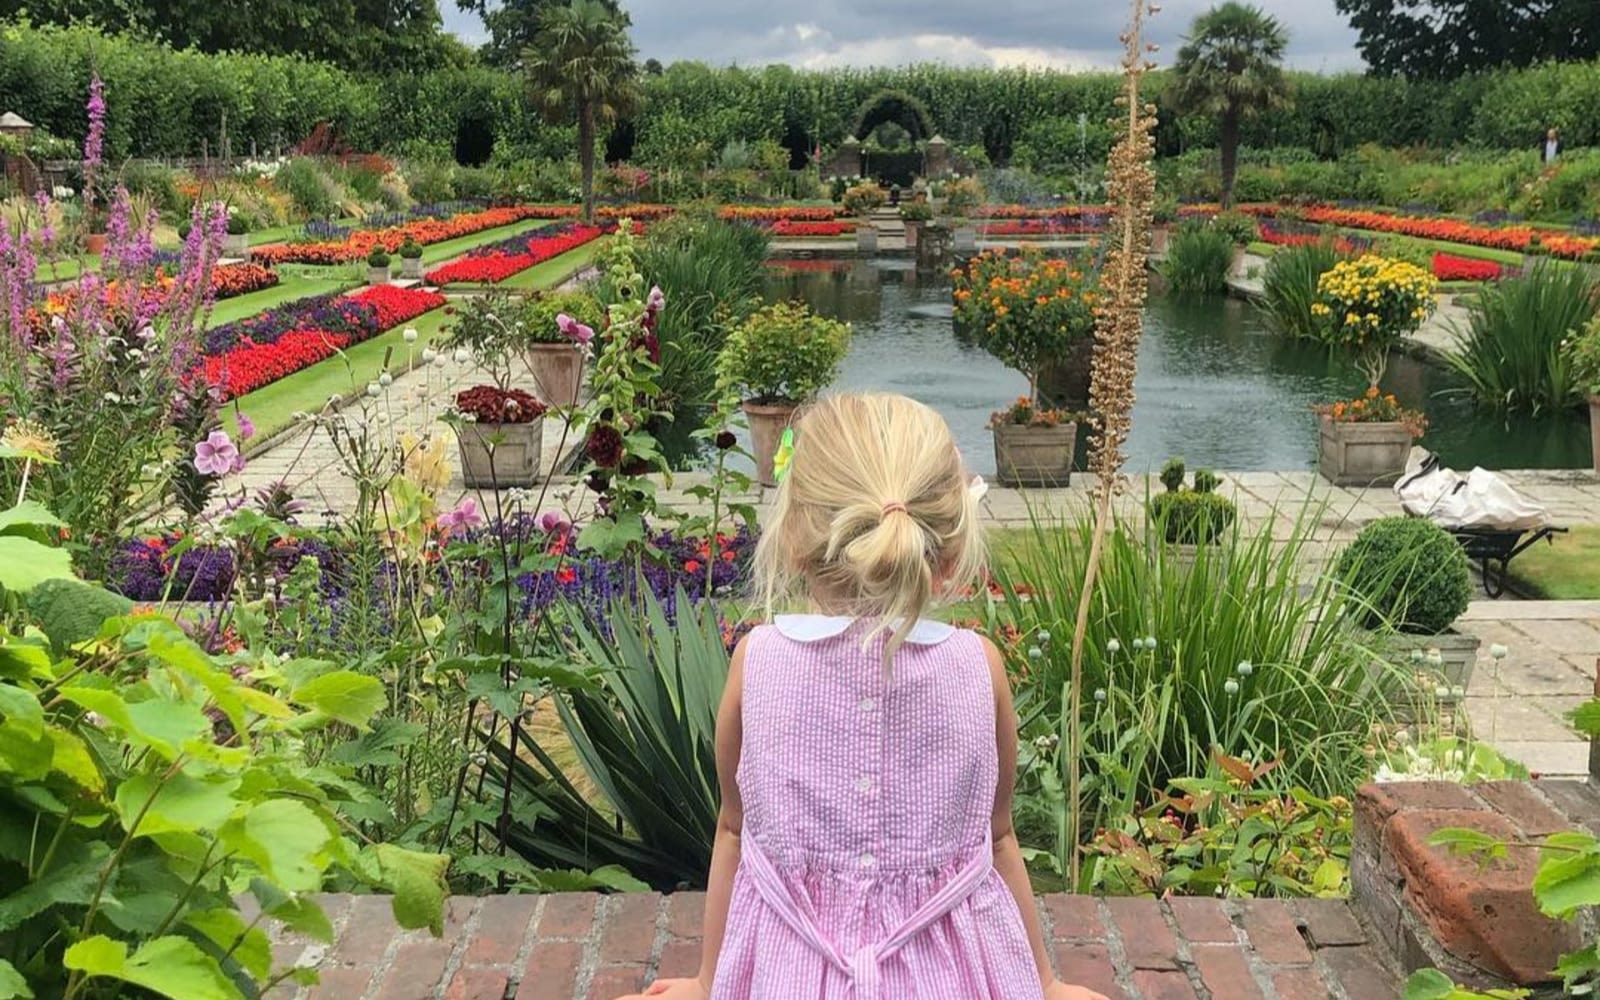 Holly Branson's daughter Etta looks out over a garden in London